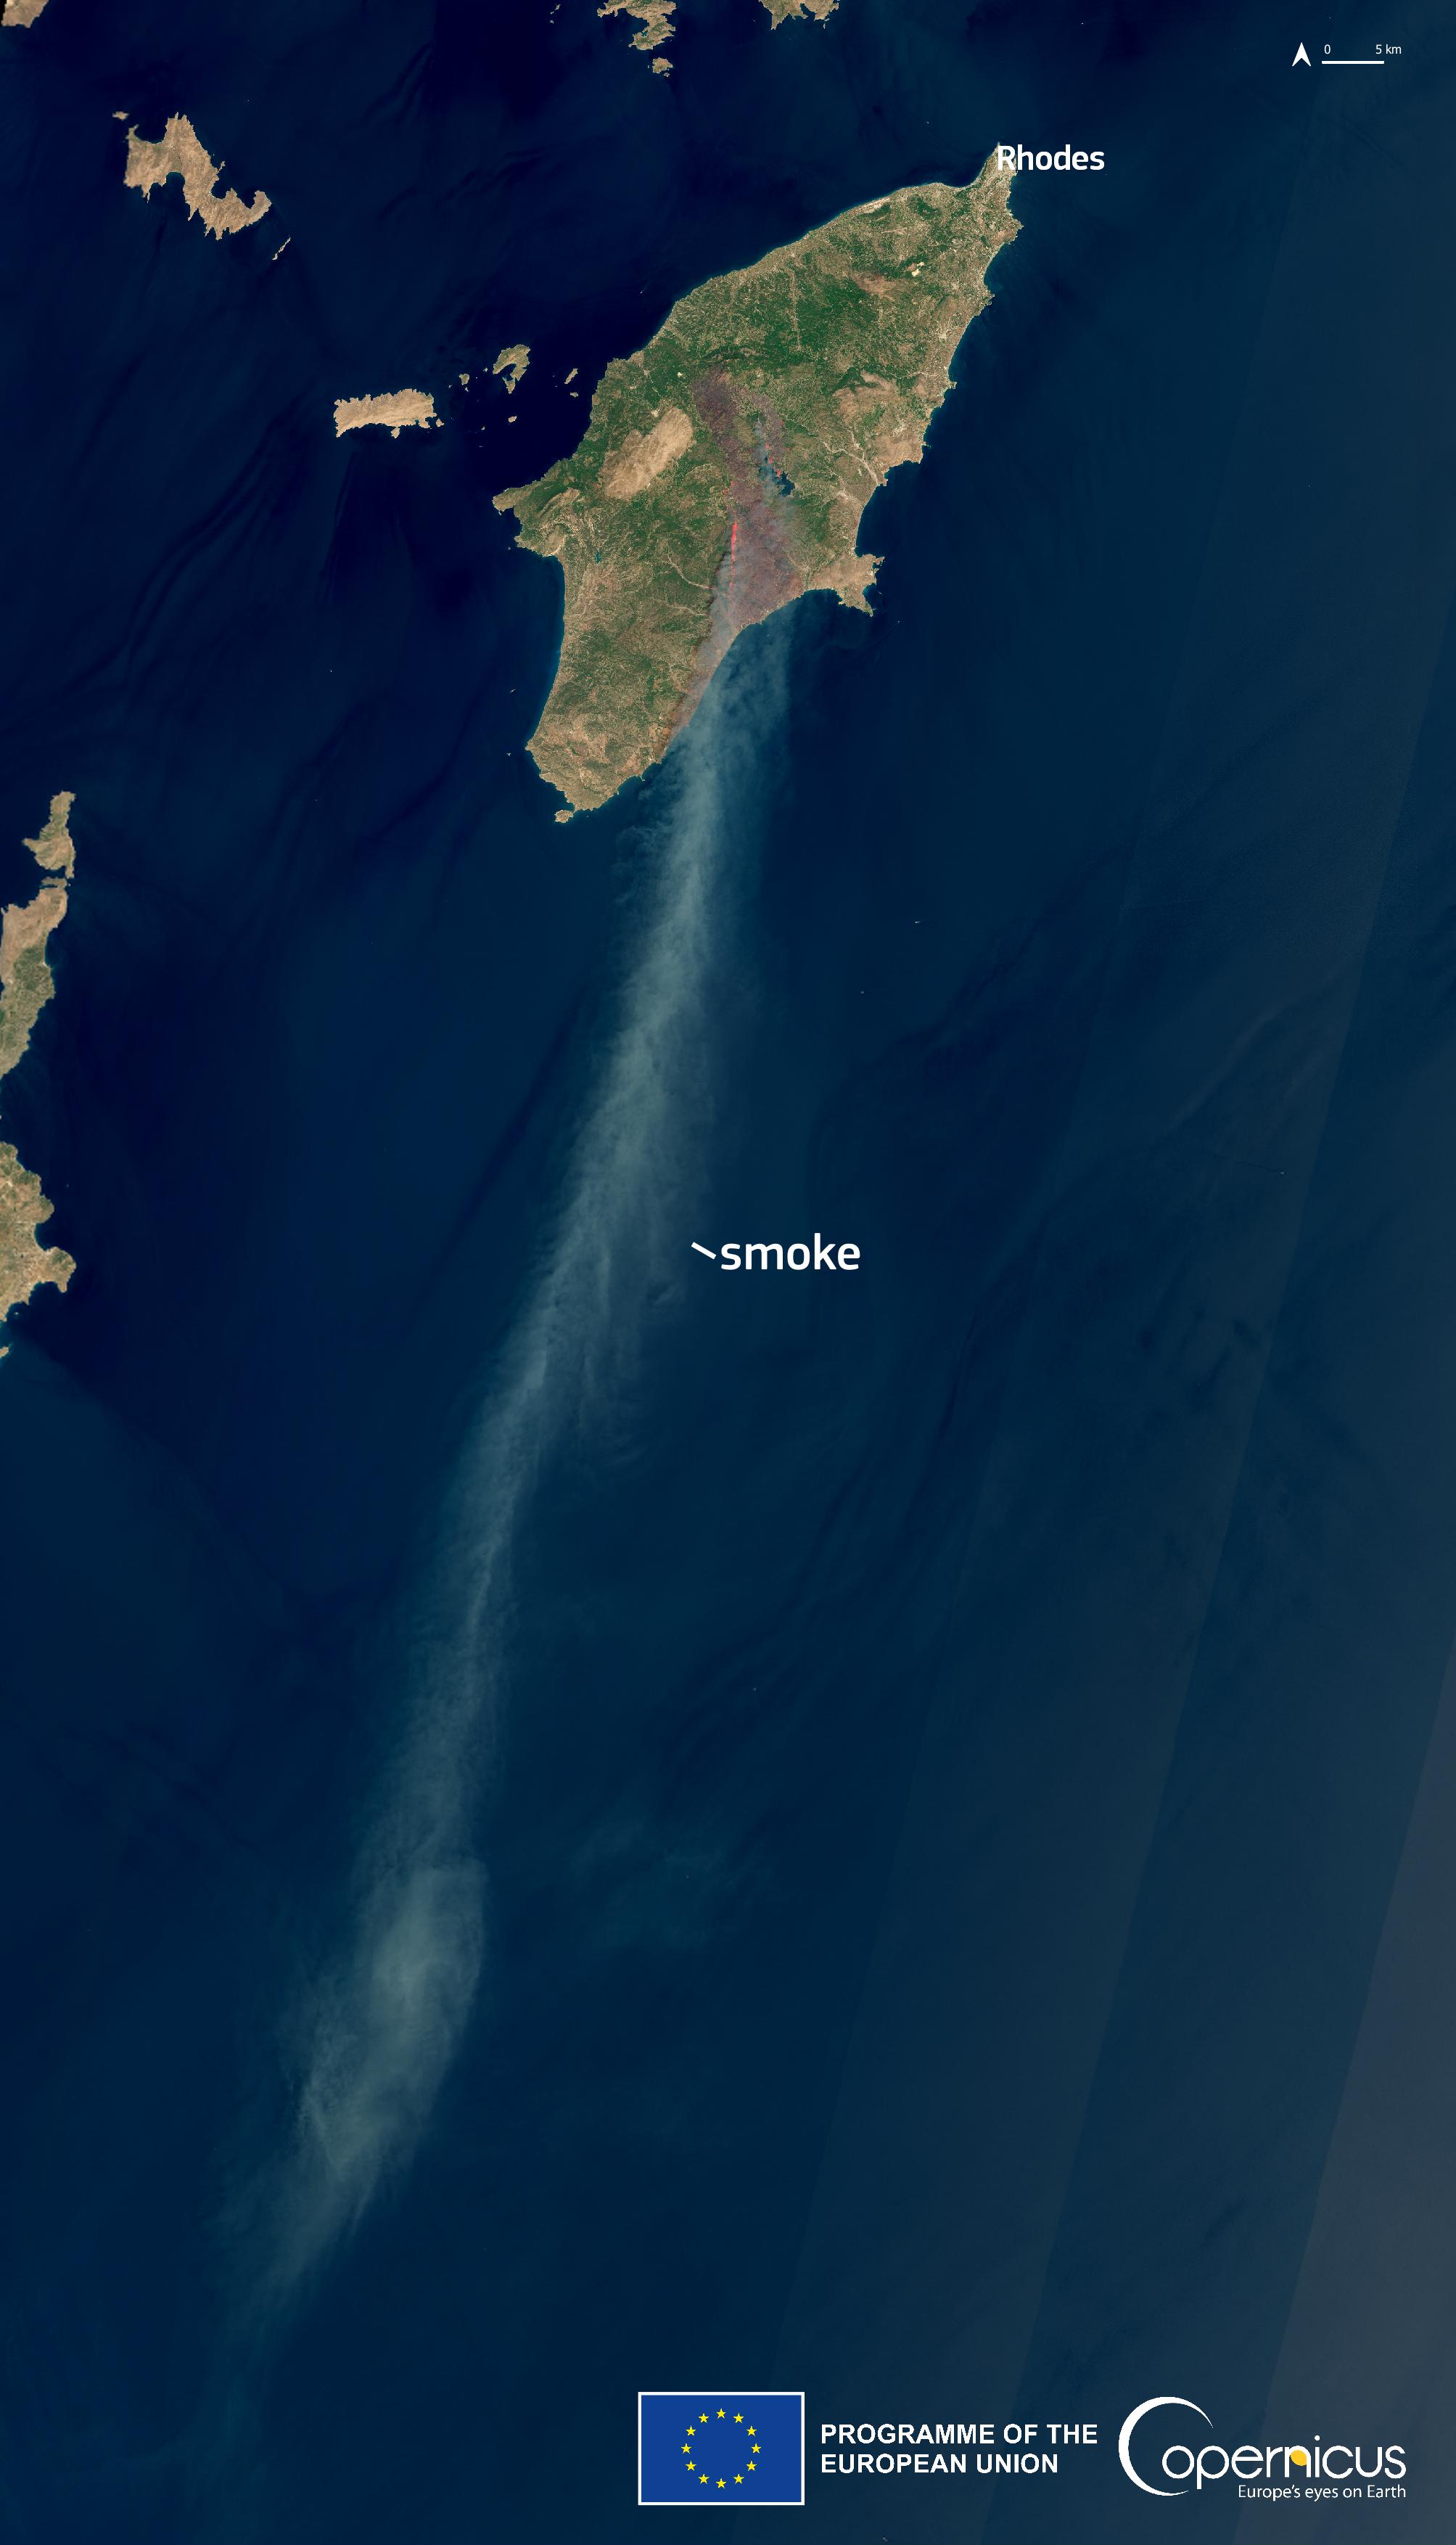 Satellite image of a wildfire in Rhodes, Greece and a smoke plume in the Mediterranean Sea